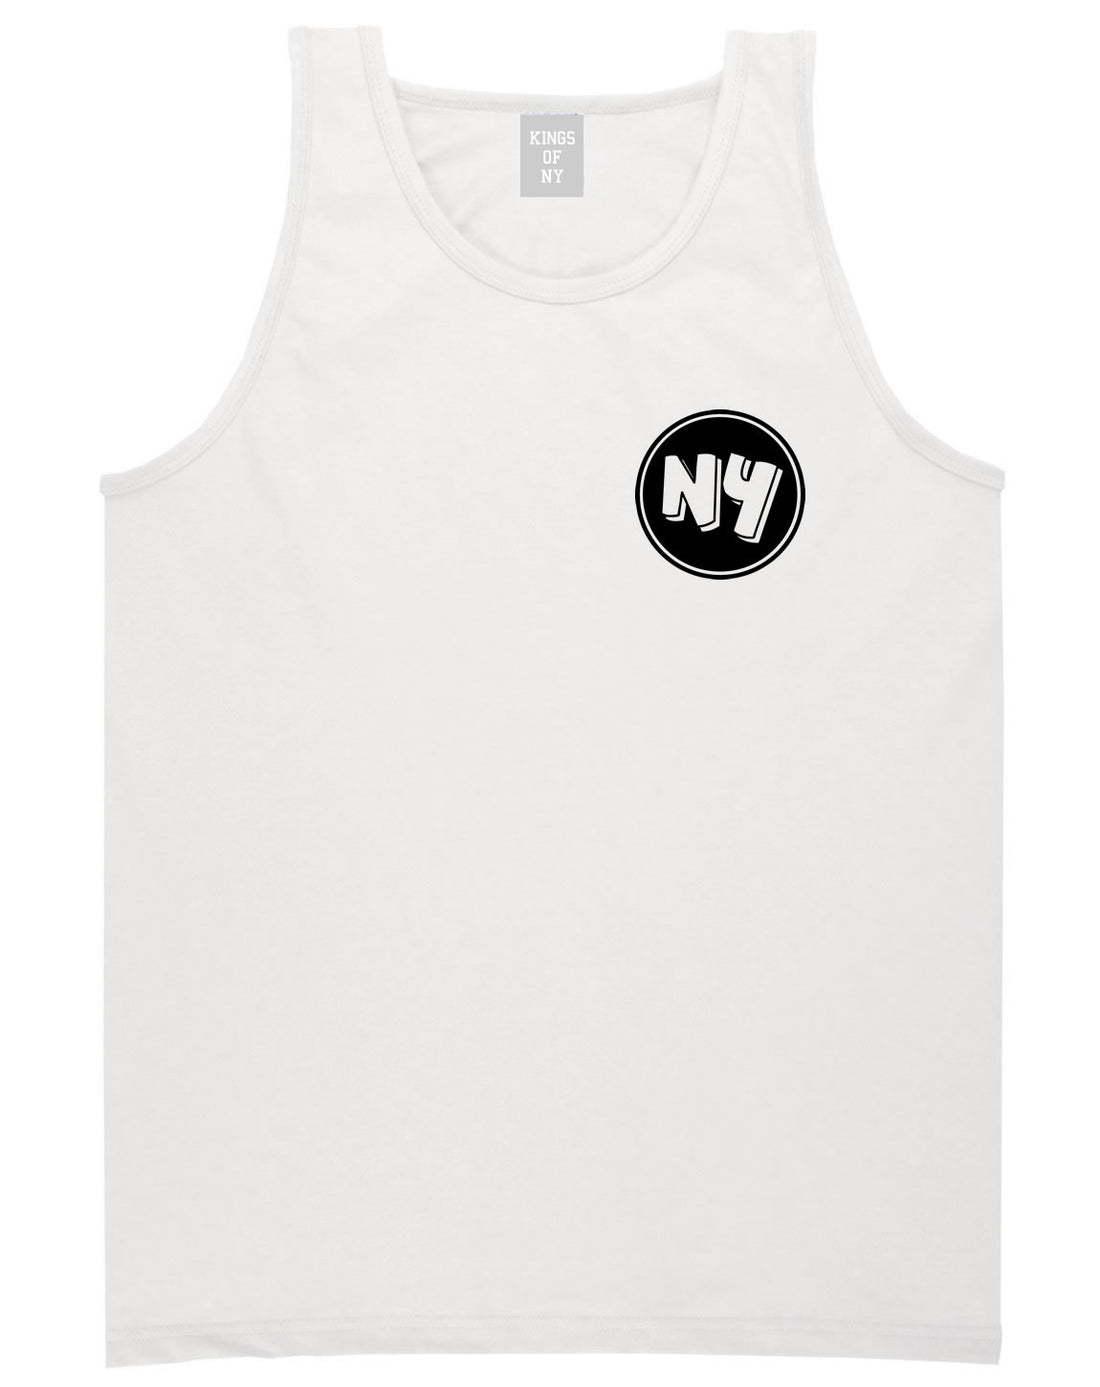 NY Circle Chest Logo Tank Top in White By Kings Of NY